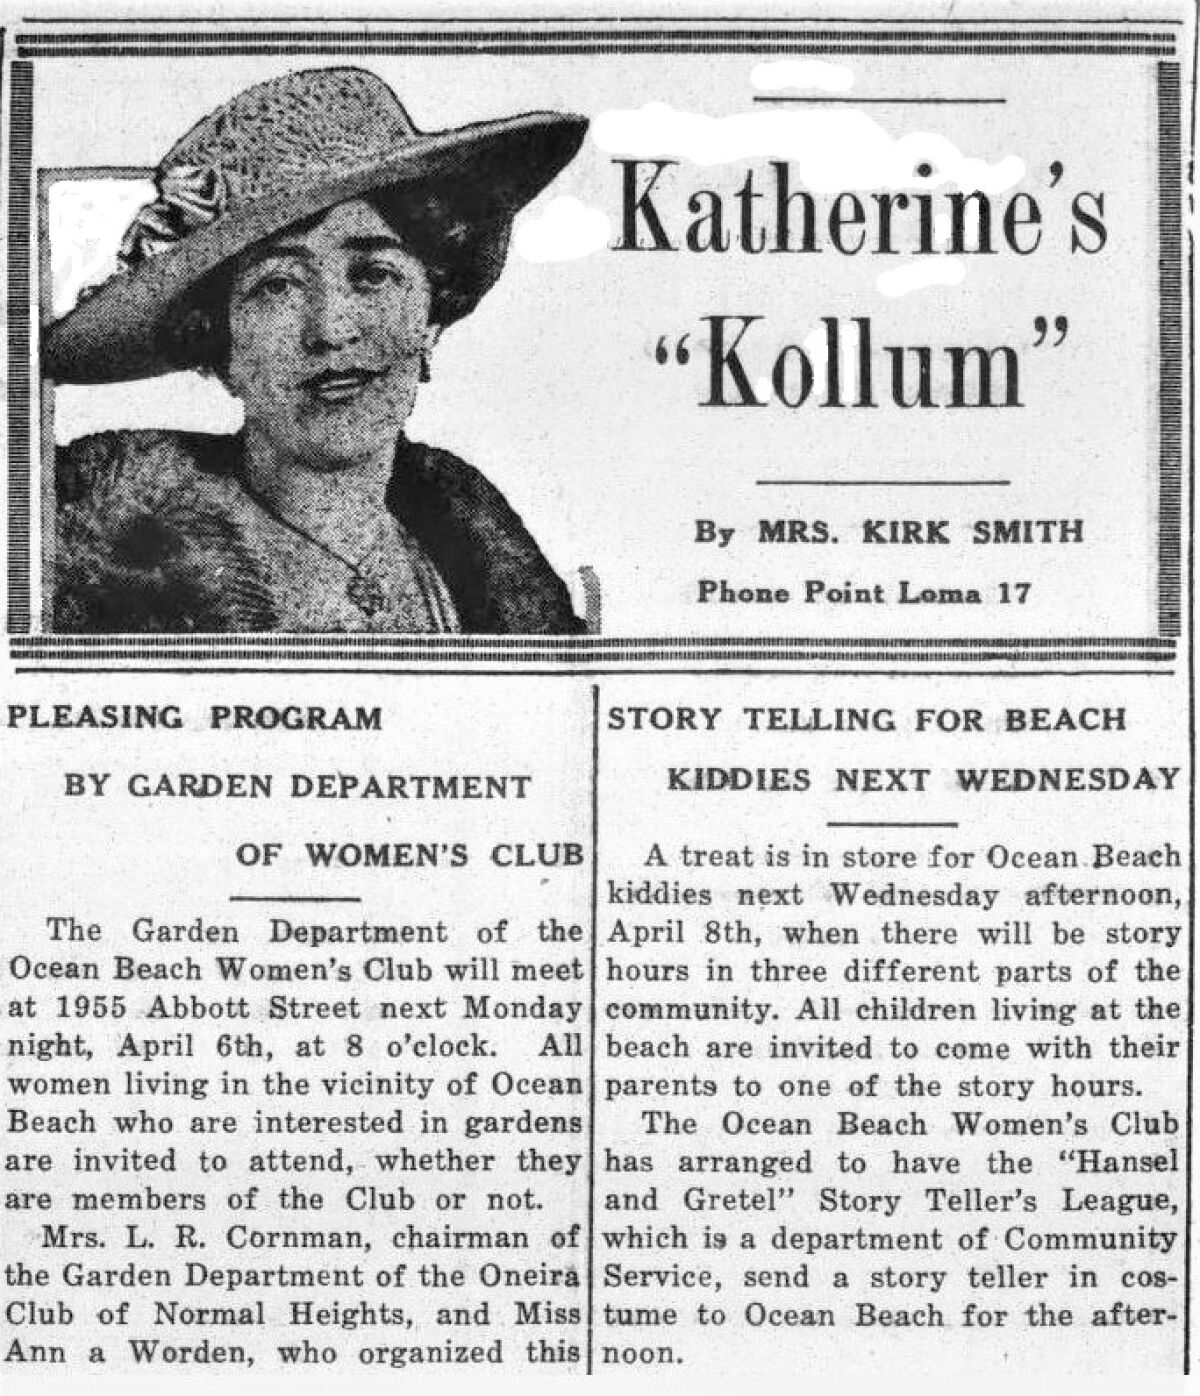 A sample of Katherine Smith’s “Kollum” from the mid-1920s.